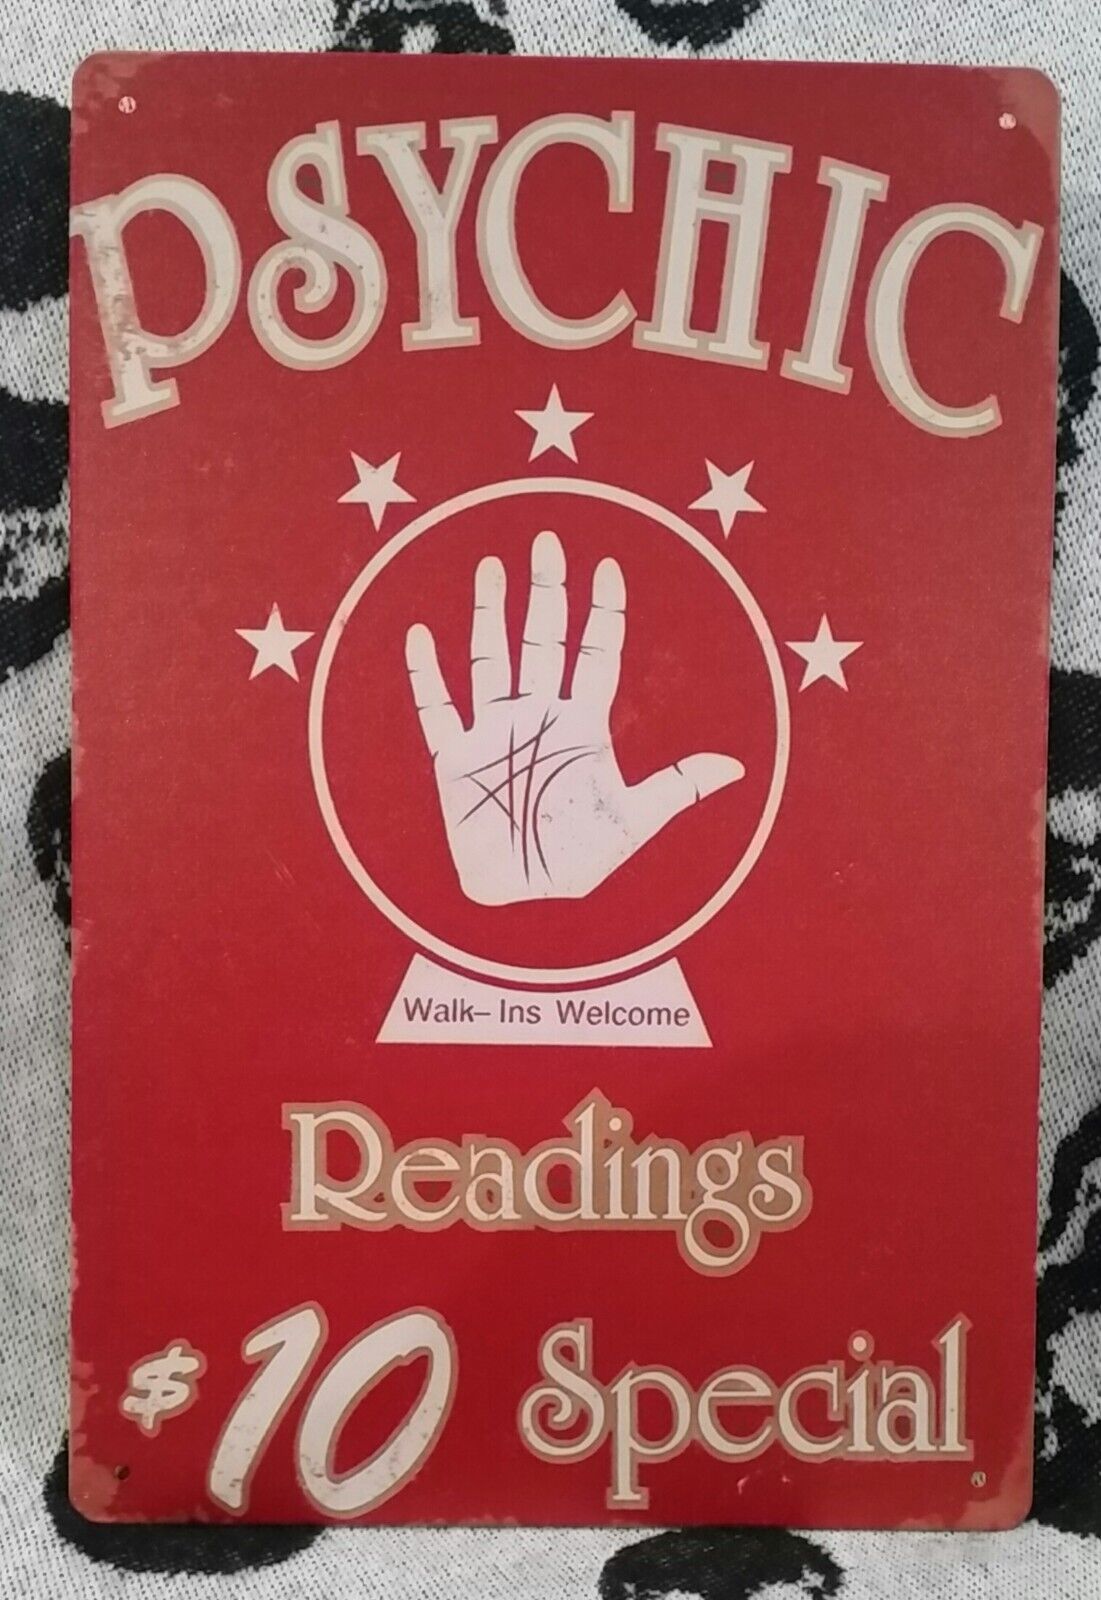 PSYCHIC READINGS  $10 Special Crystal Ball  Metal Sign  Retro Style  New Occult